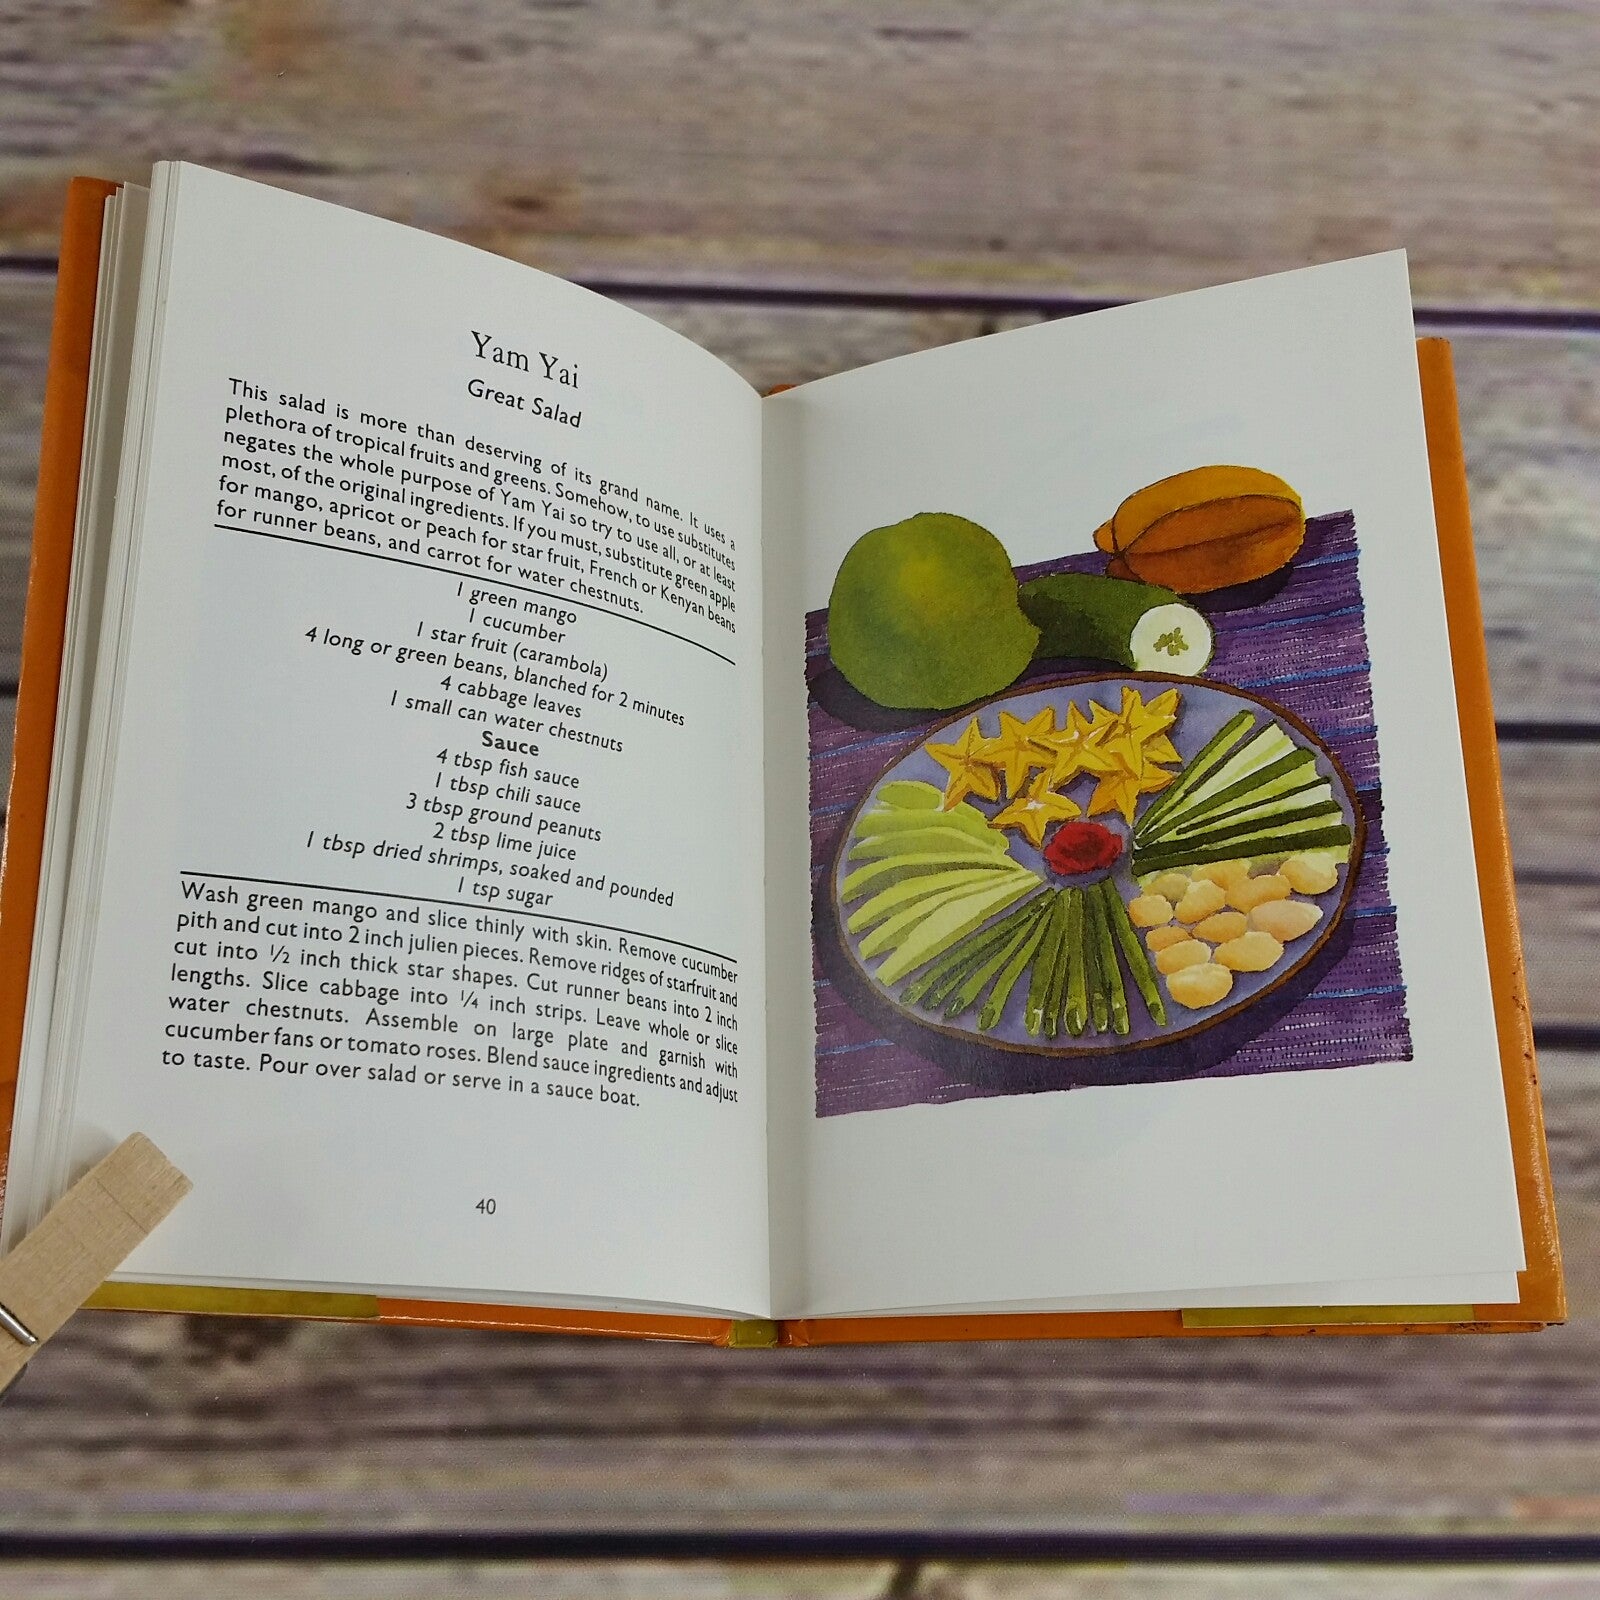 Vintage Cook Book A Little Thai Cookbook 1991 Thai Recipes Terry Tan Hardcover with Dust Jacket - At Grandma's Table